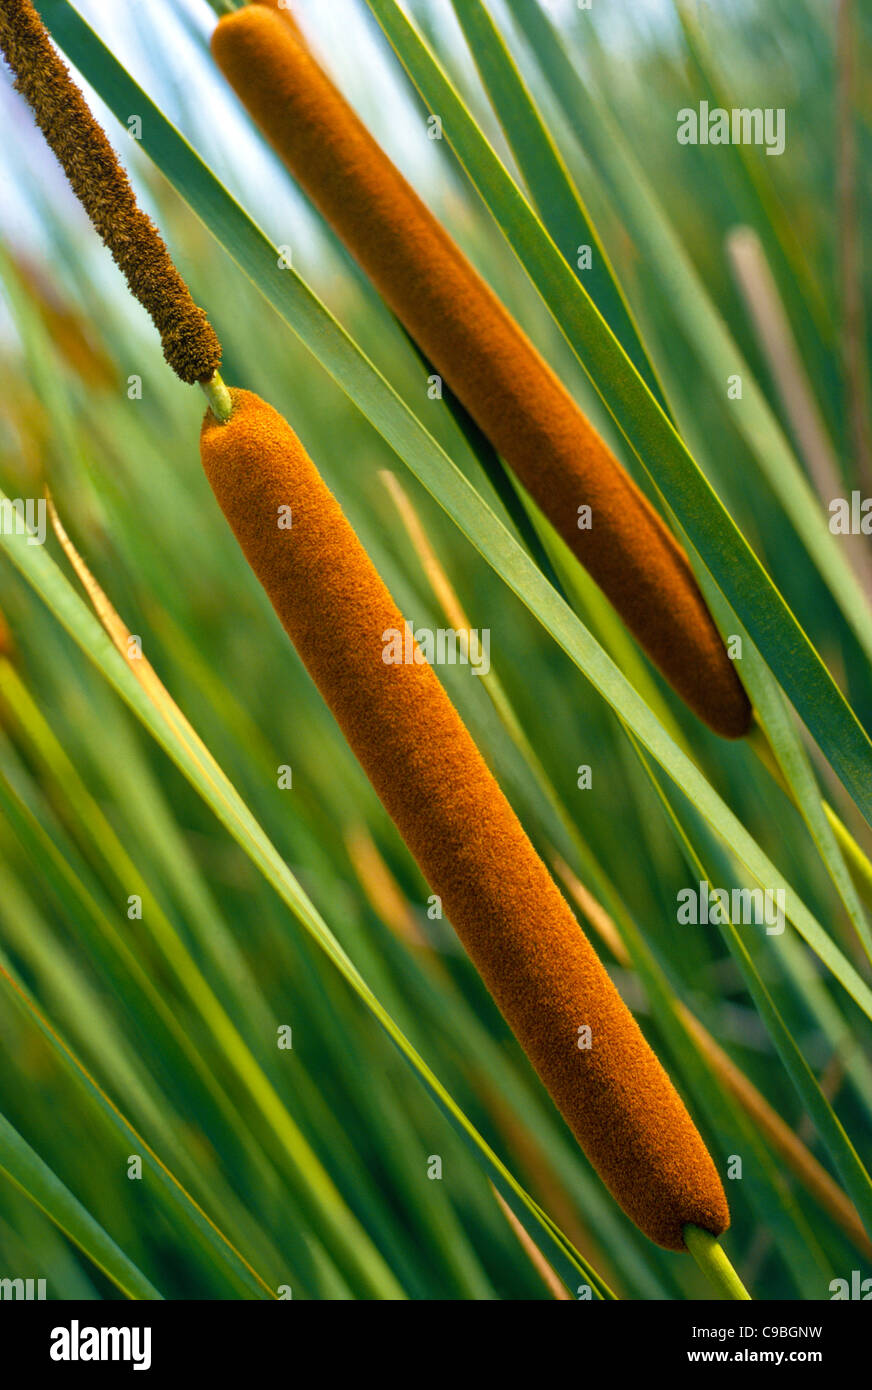 Cattails are herbaceous perennial plants easily recognized by their long and slender green stalks topped with brown sausage-shaped heads that flower. Stock Photo